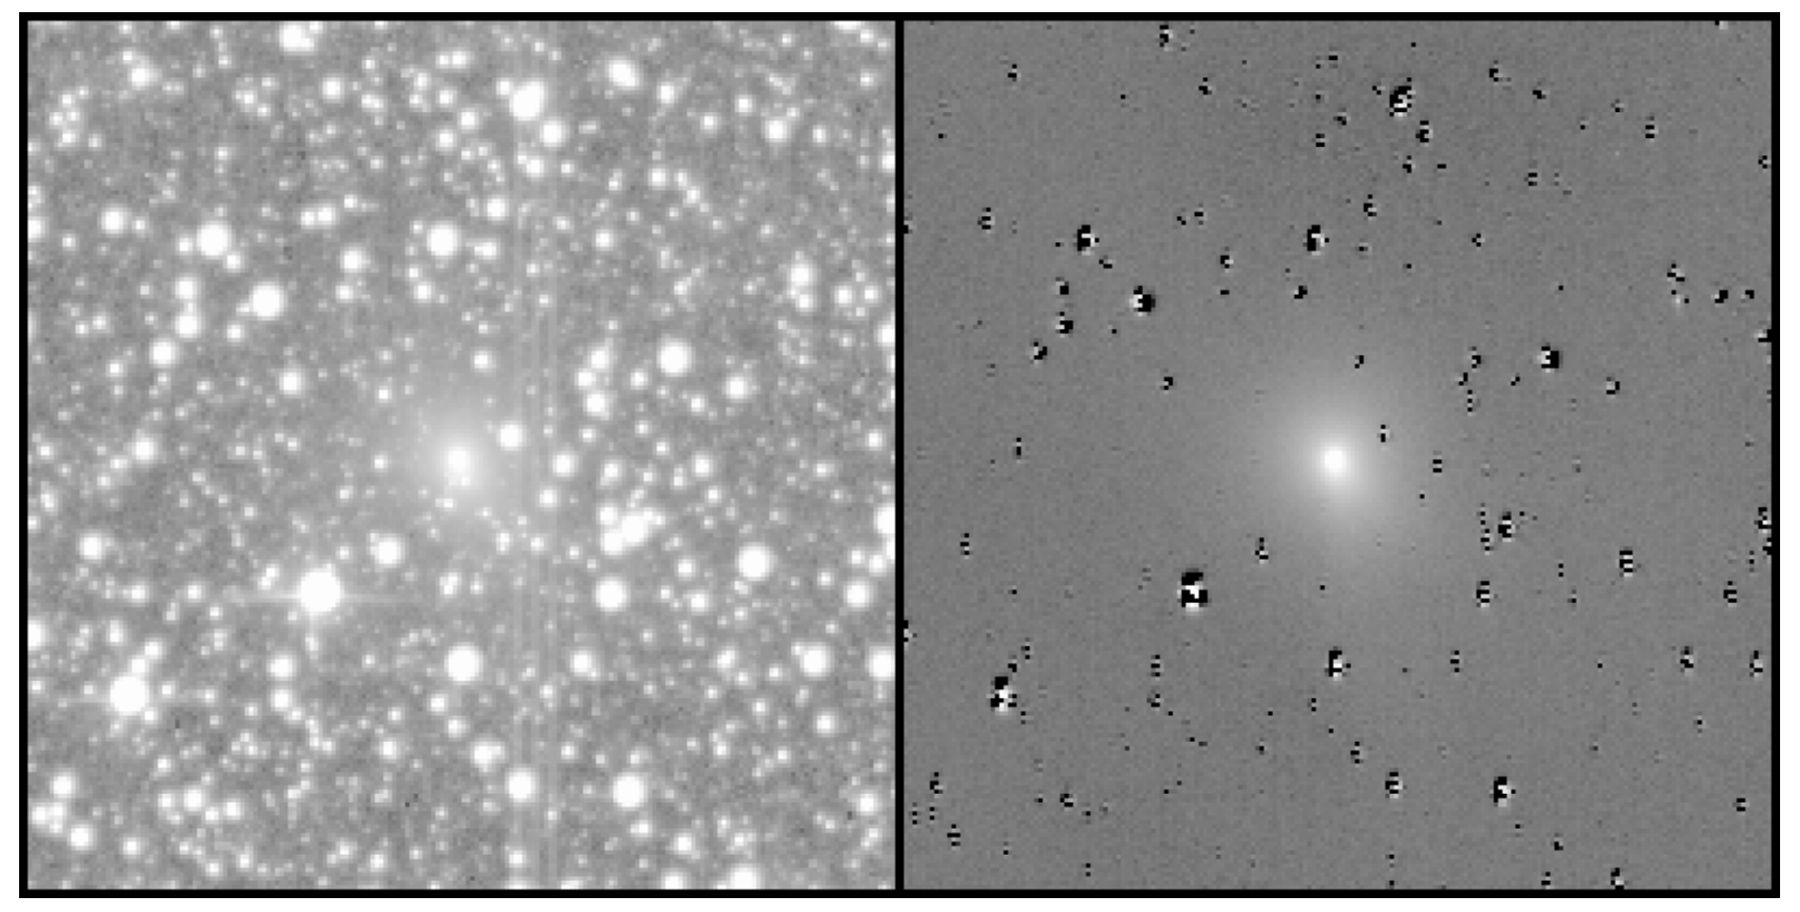 Two images show data from TESS (left) including the comet and stars, and then processed (right) with the stars removed to show the comet more clearly. Credit: Farnham et al.